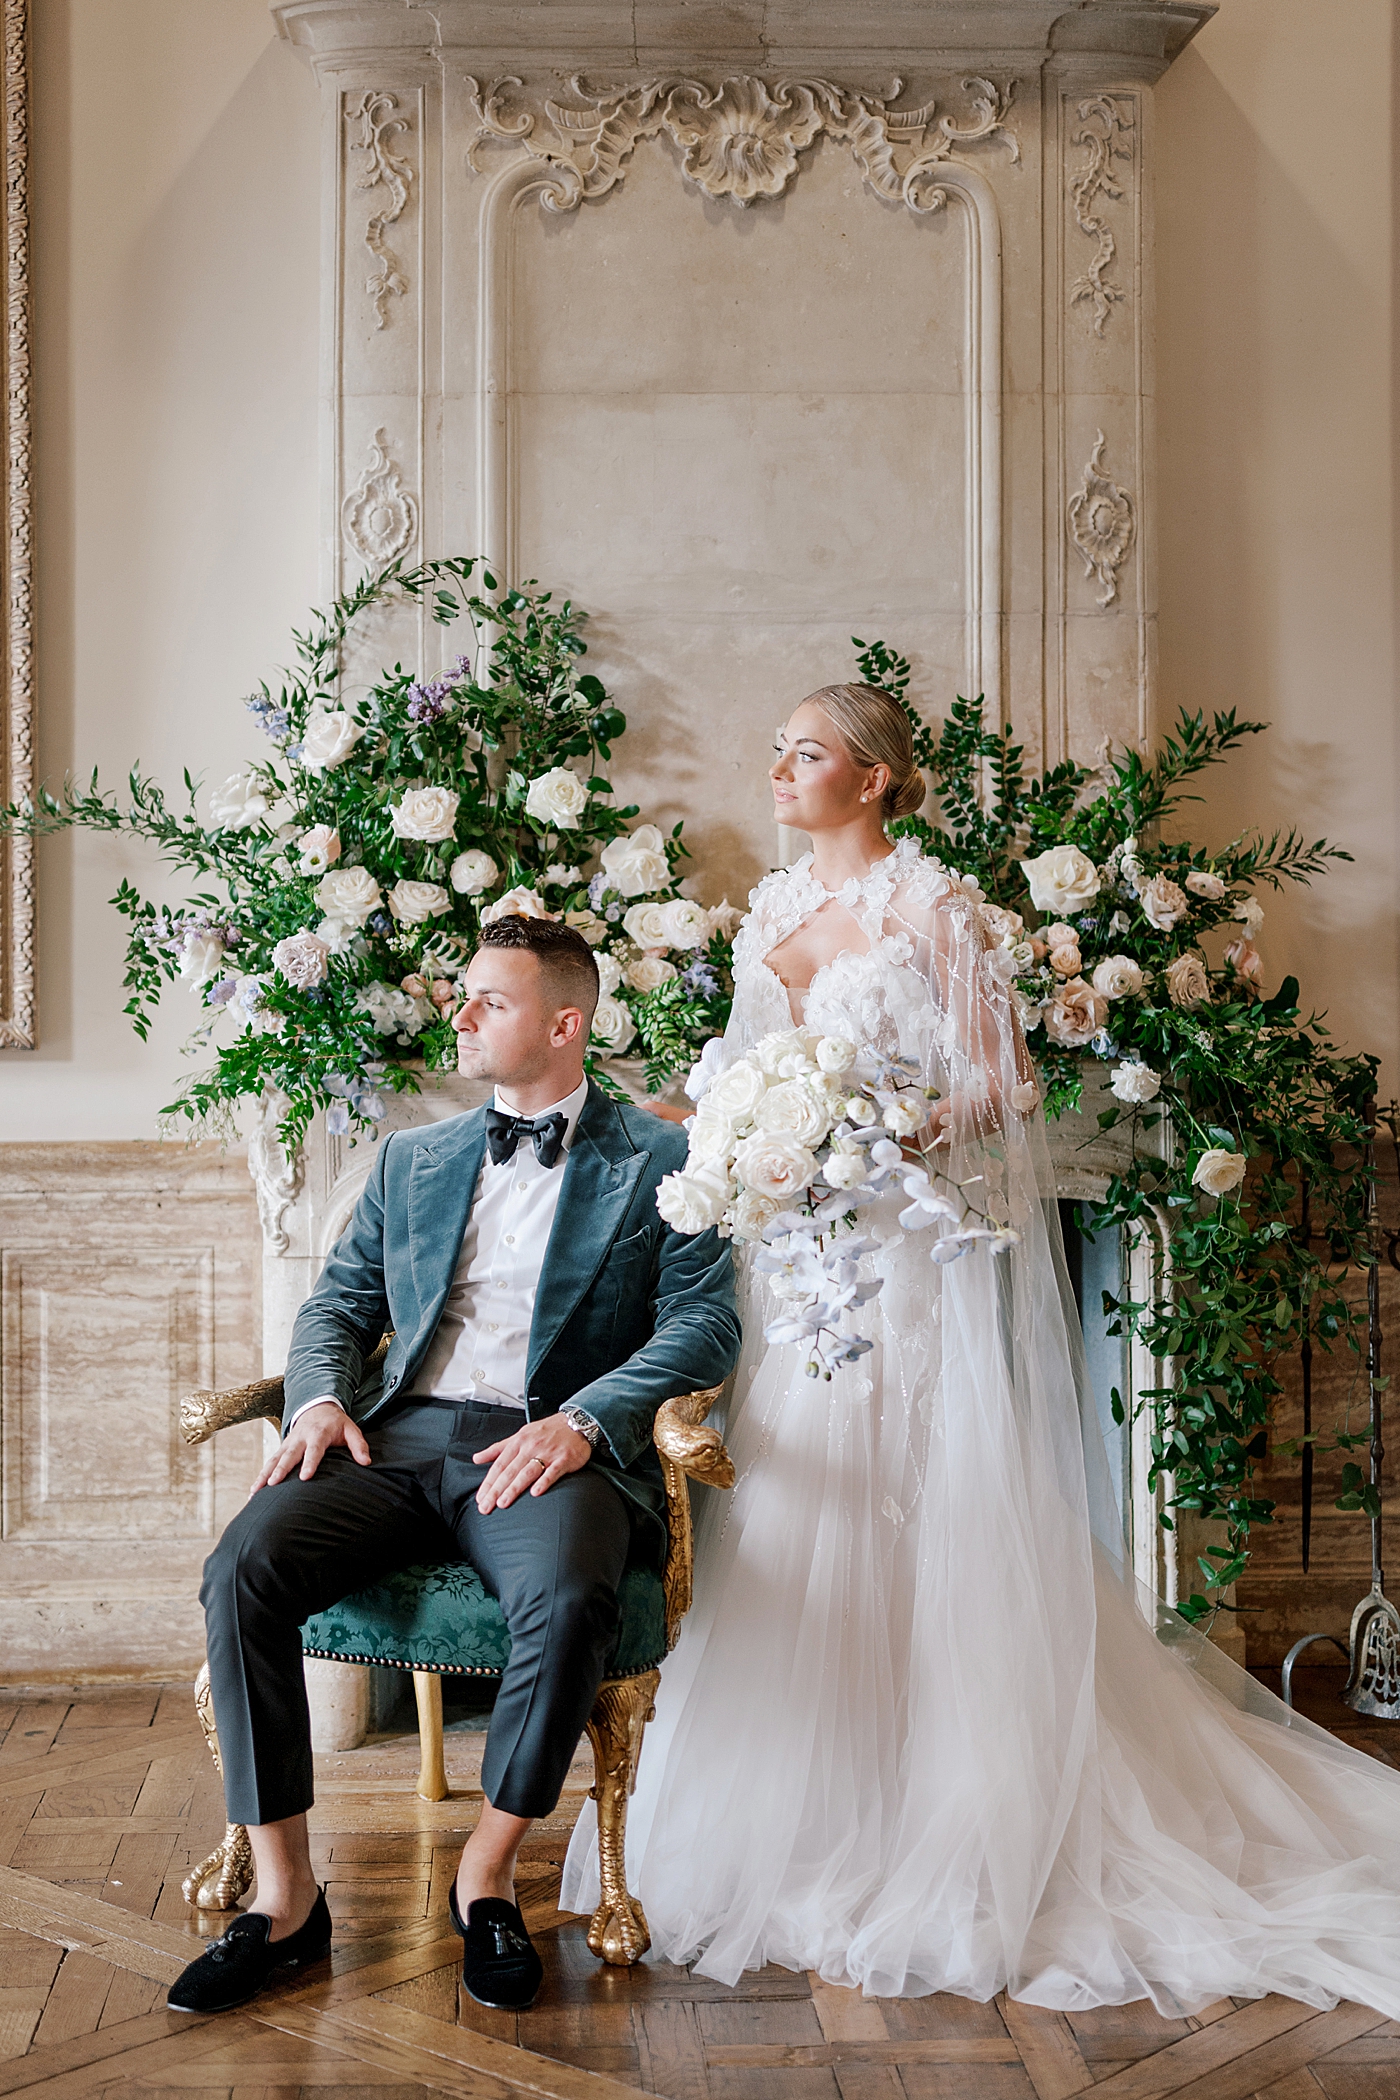 Editorial bride and groom portrait in front of mantel | Image by Hope Helmuth Photography